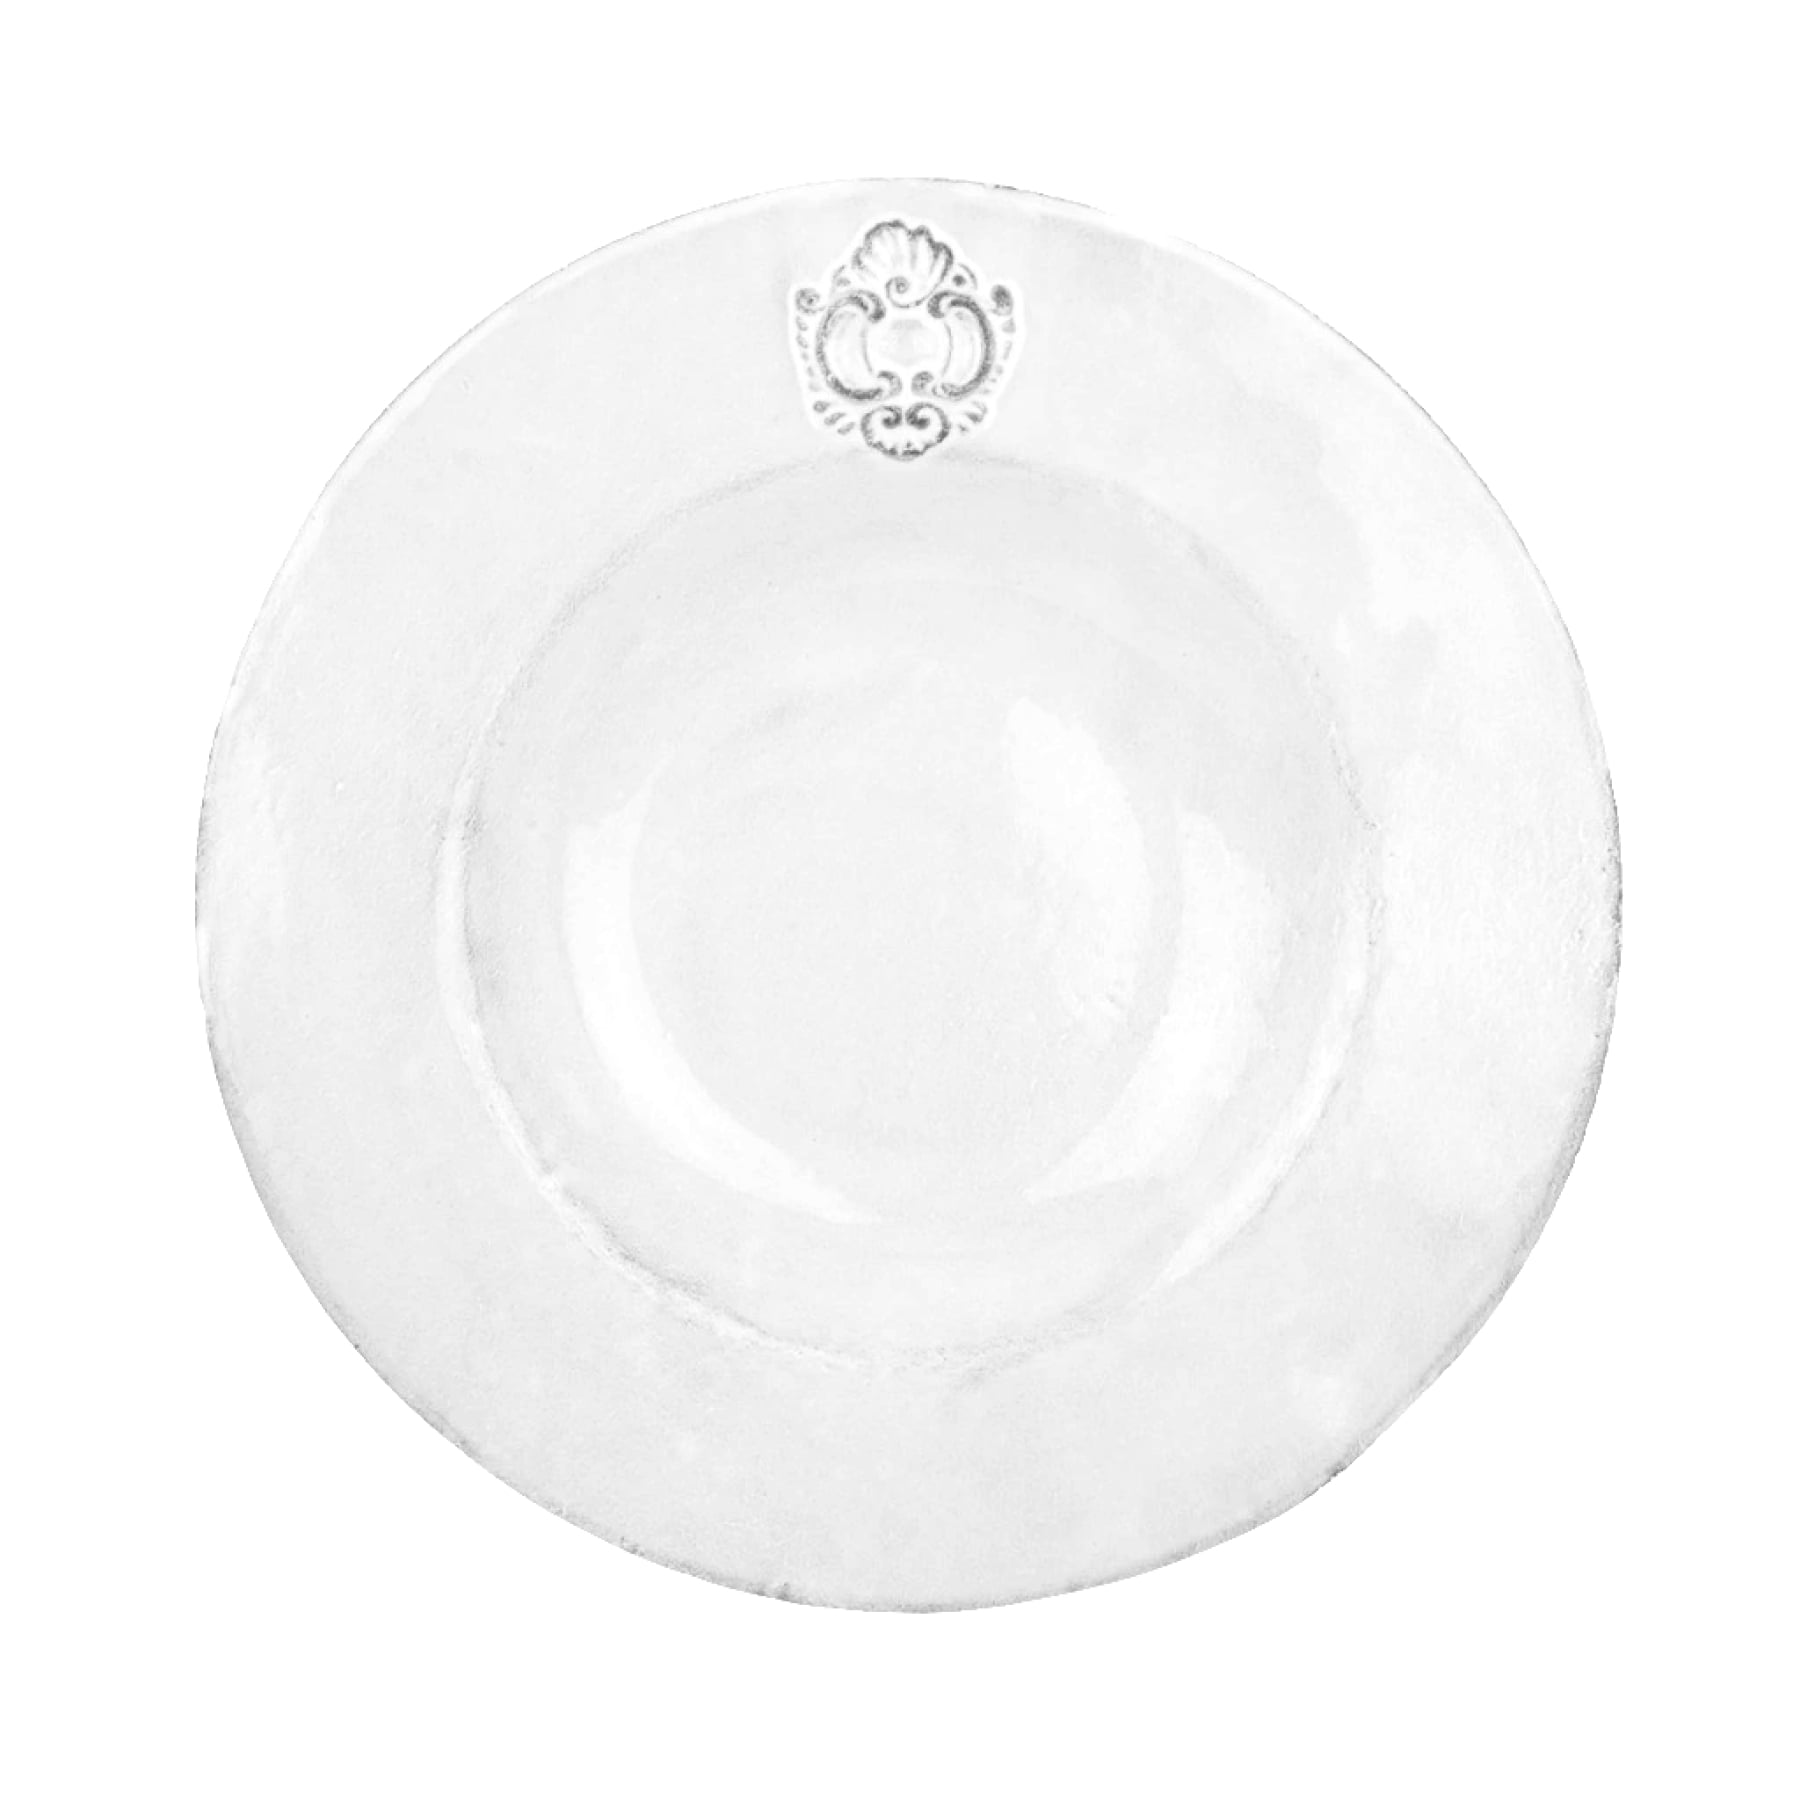 Charles plate-Shallow plate L ⌀26-Handmade in France by CARRON